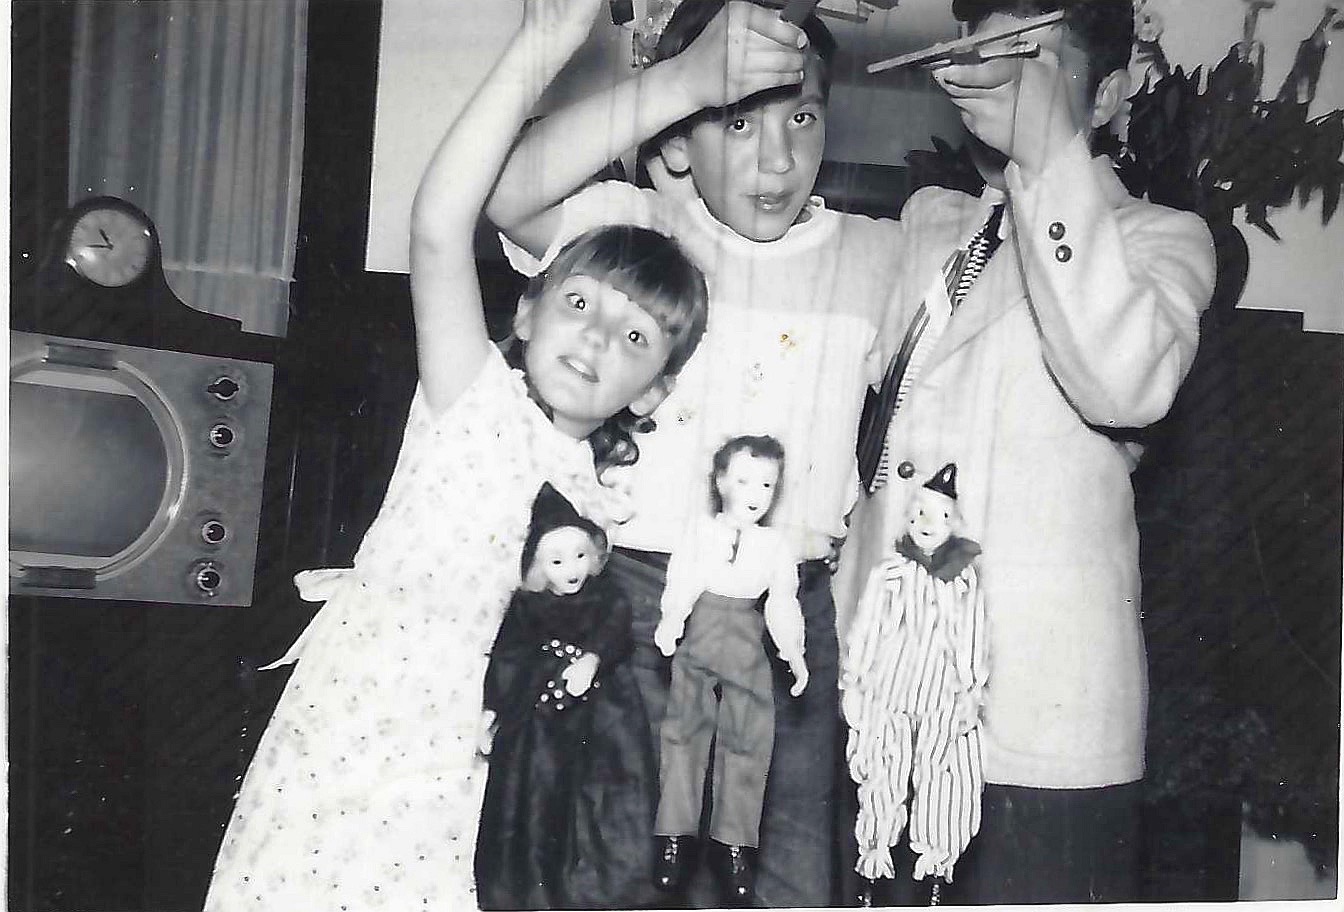 Jimmy and Judy performing with marionette puppets (Jack, Bimbo the Clown and the Witch).